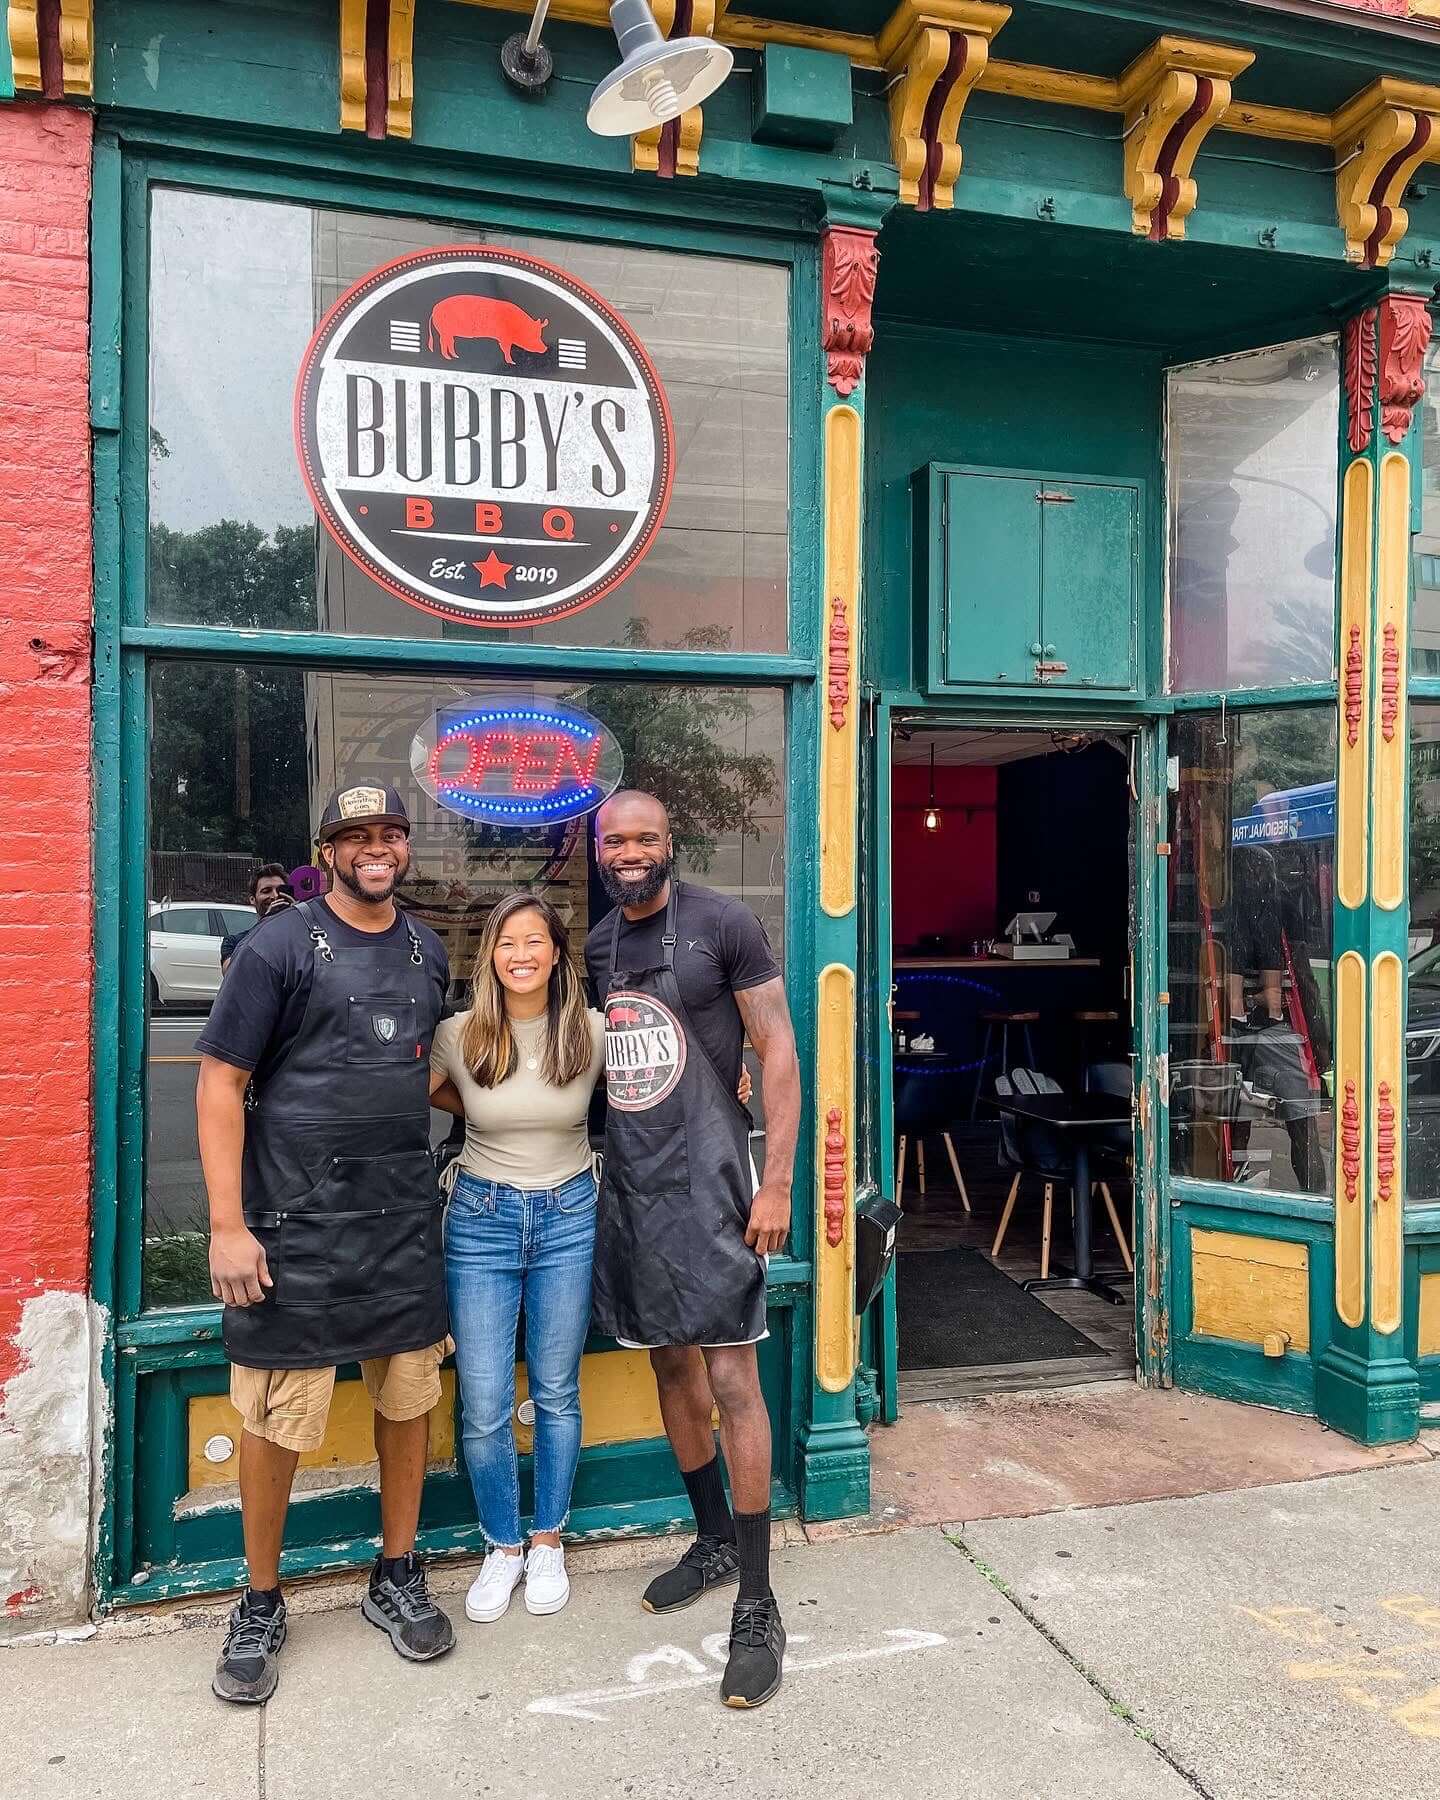 Linh Phillips ’13S (MBA) standing in the middle of two african american men whom work or are the owners of Bubby's BBQ, which they are standing in front of smiling